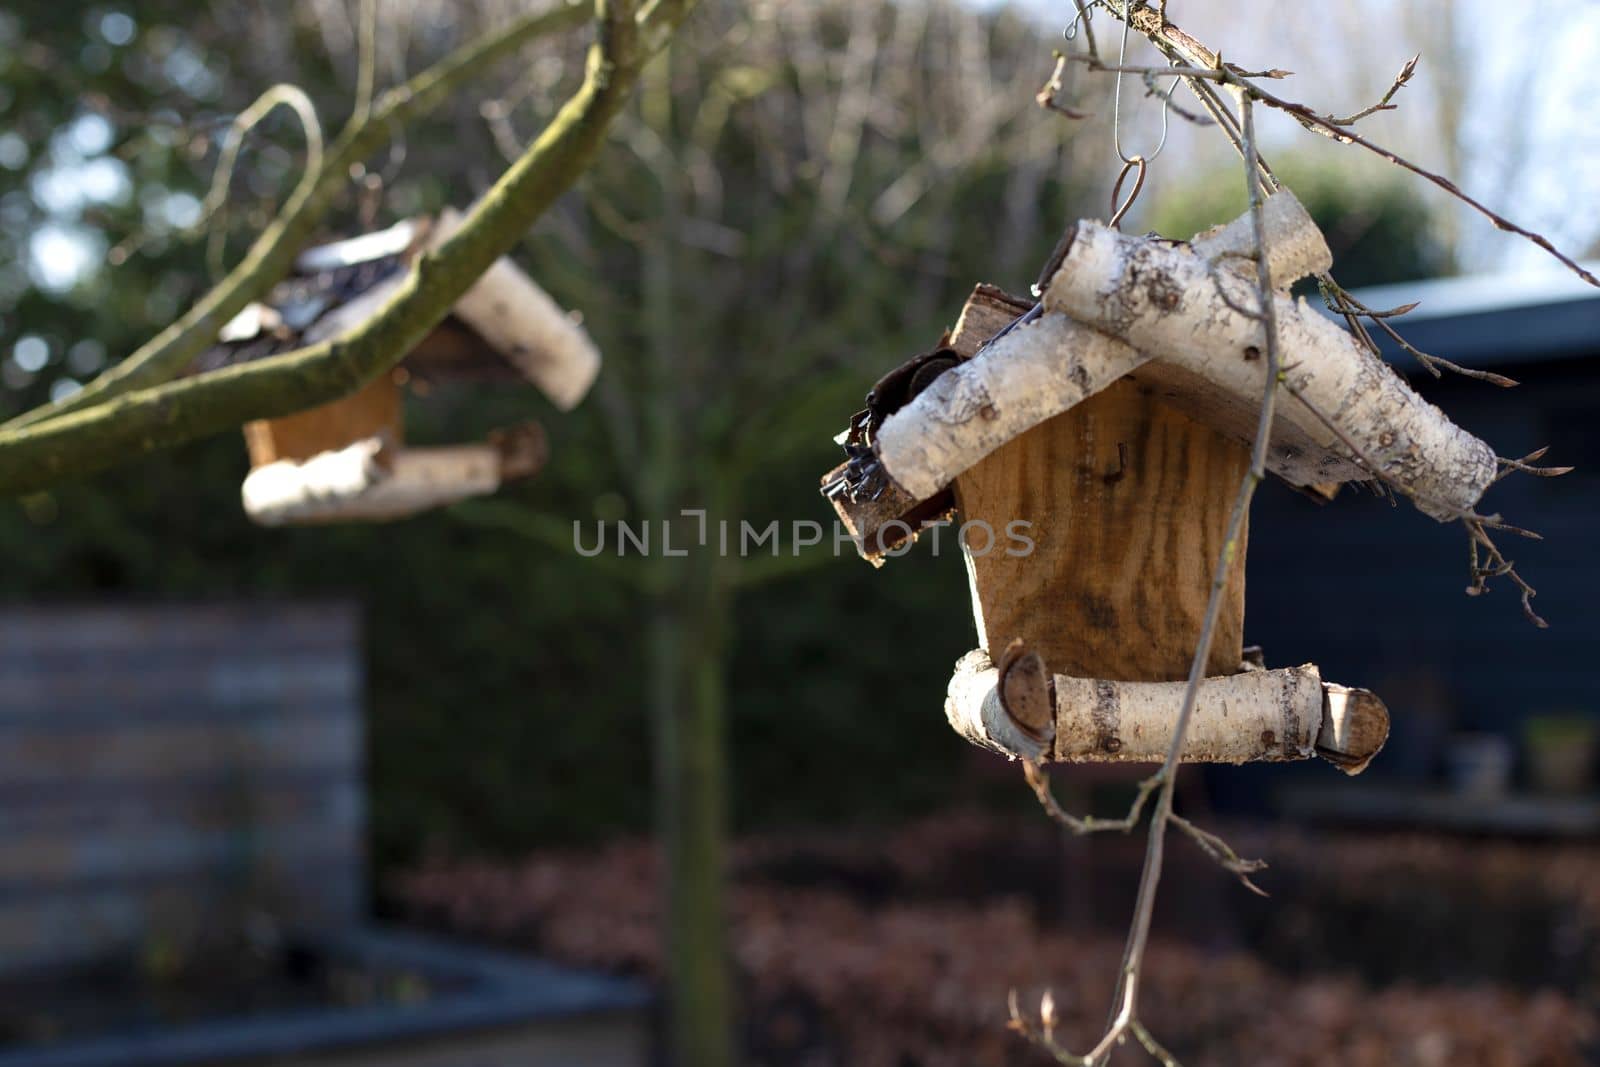 wooden birdhouse for birds on a tree in the Park,garden close-up handmade house for birds in nature forest, spring concept close up